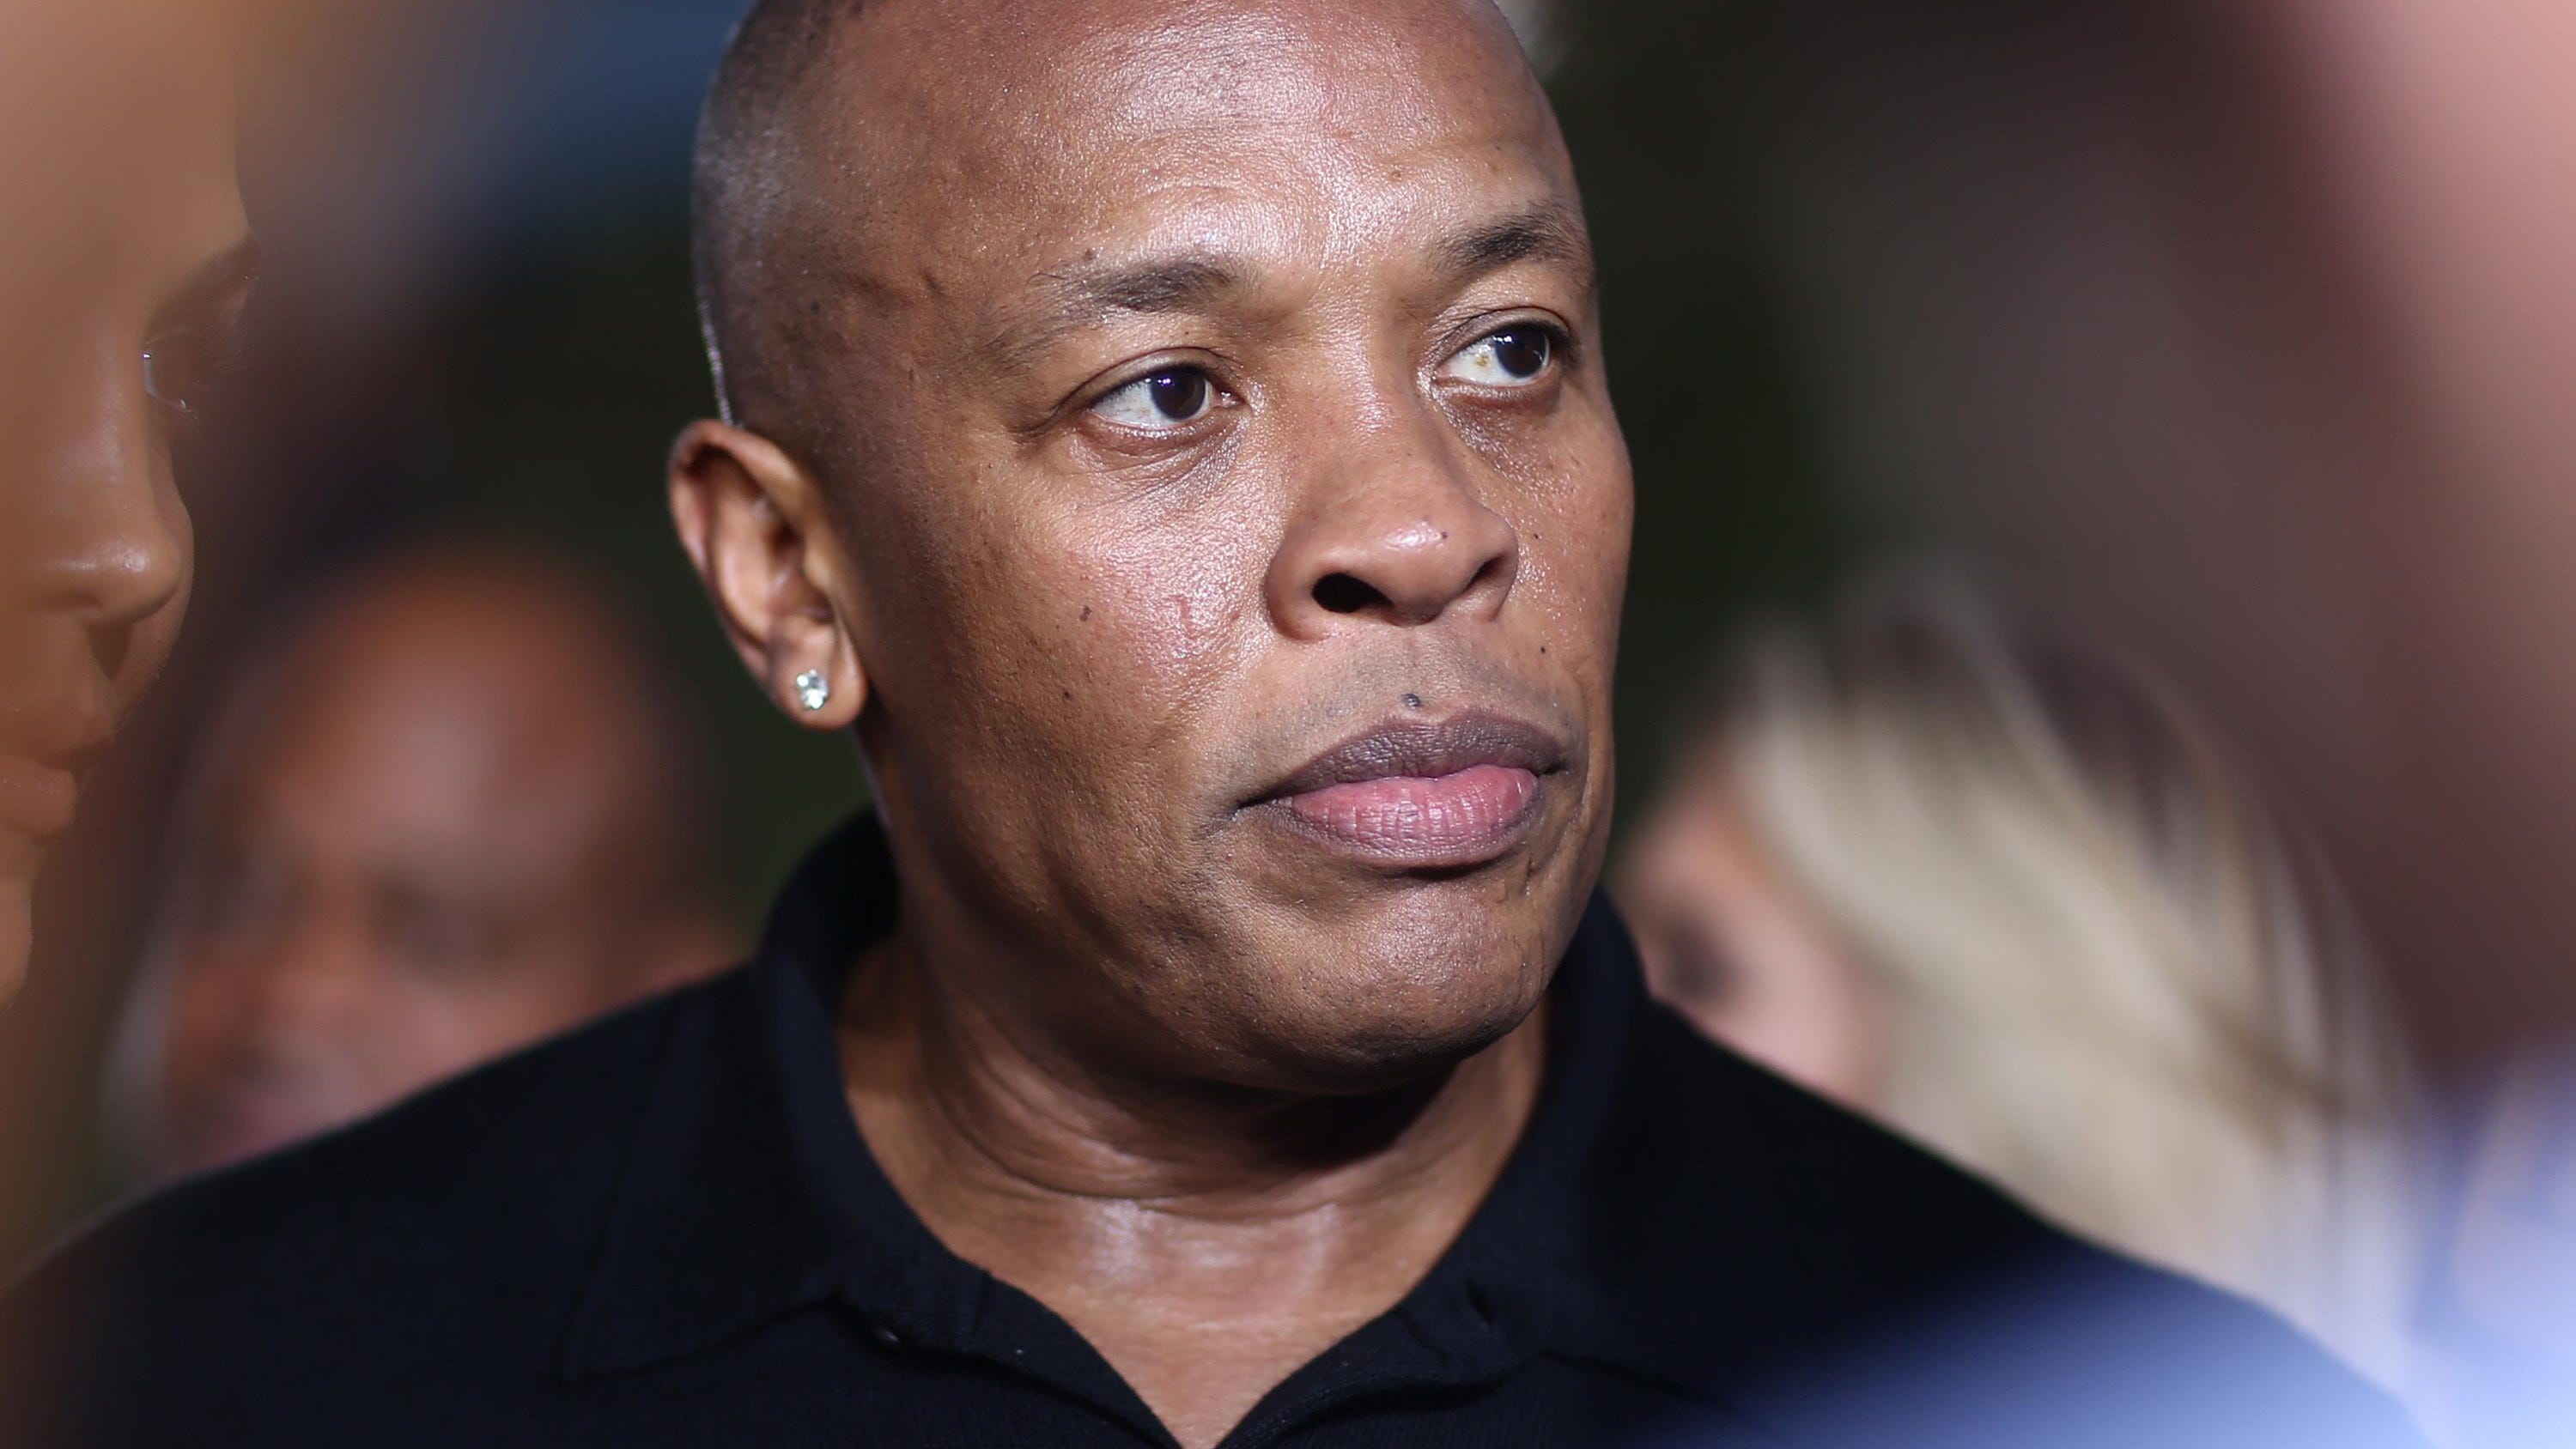 Dr. Dre hospitalized after suffering brain aneurysm, report says